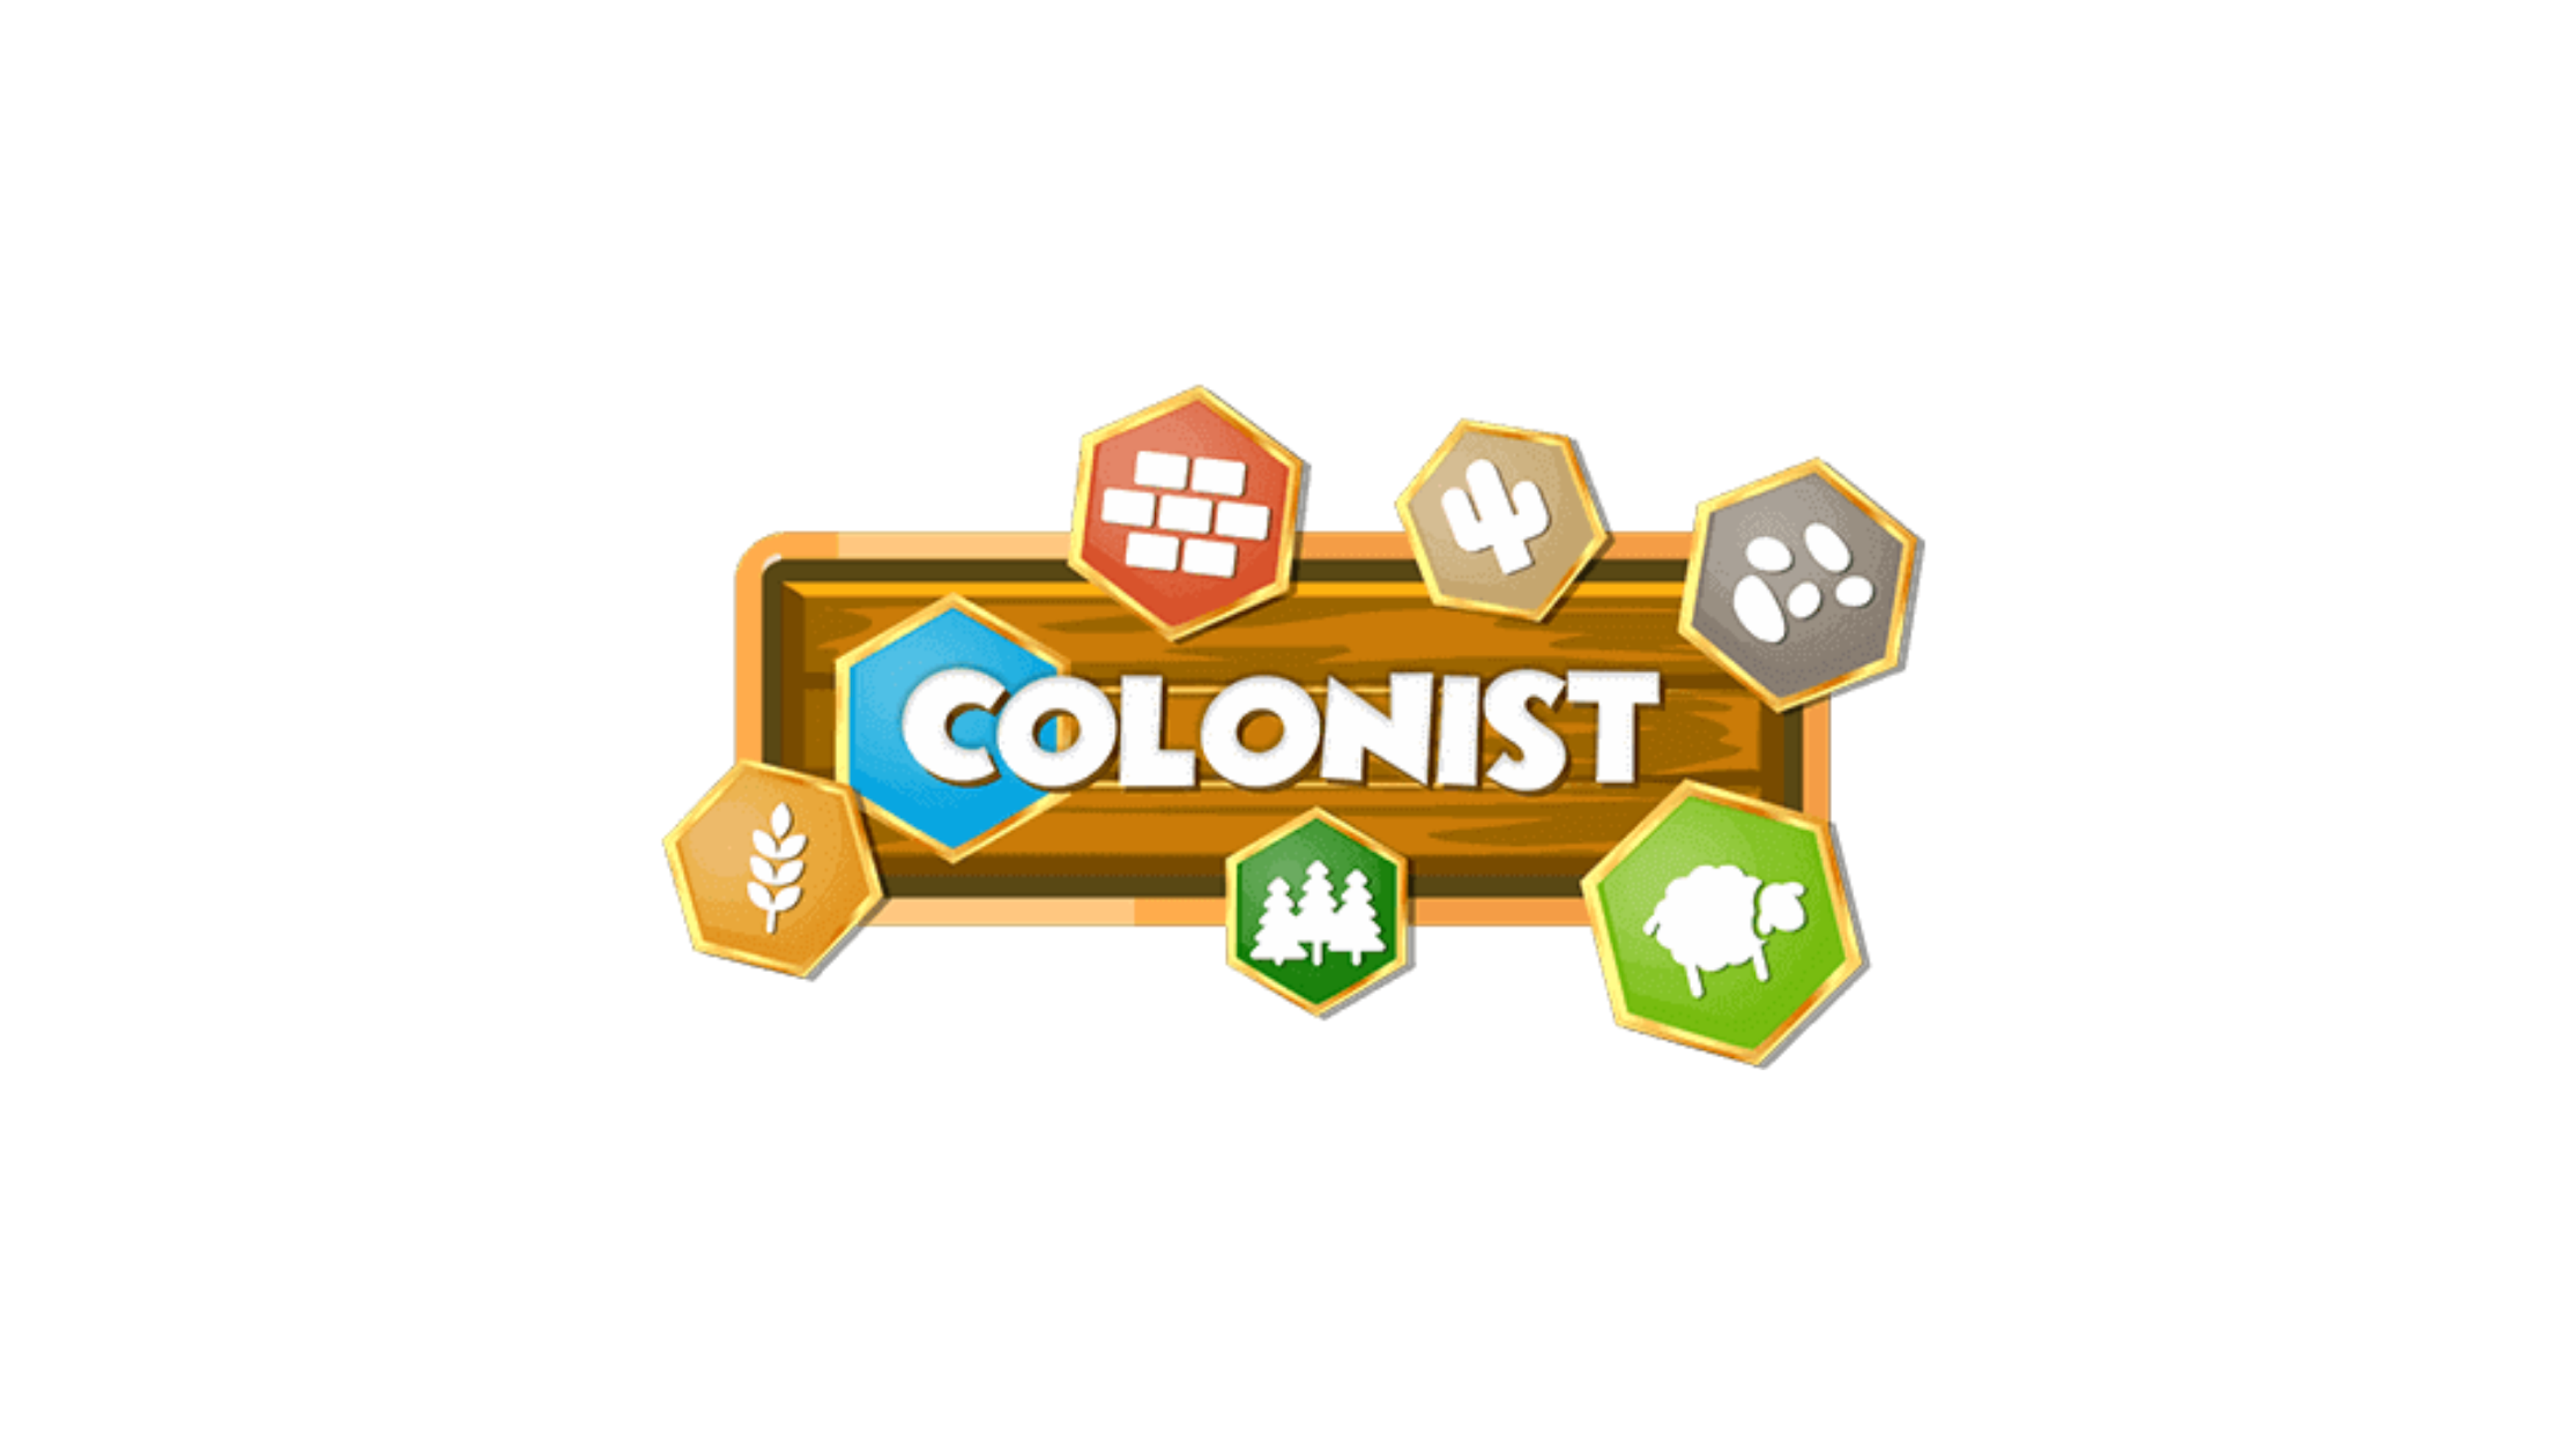 Working at Colonist - Join The Online Guild